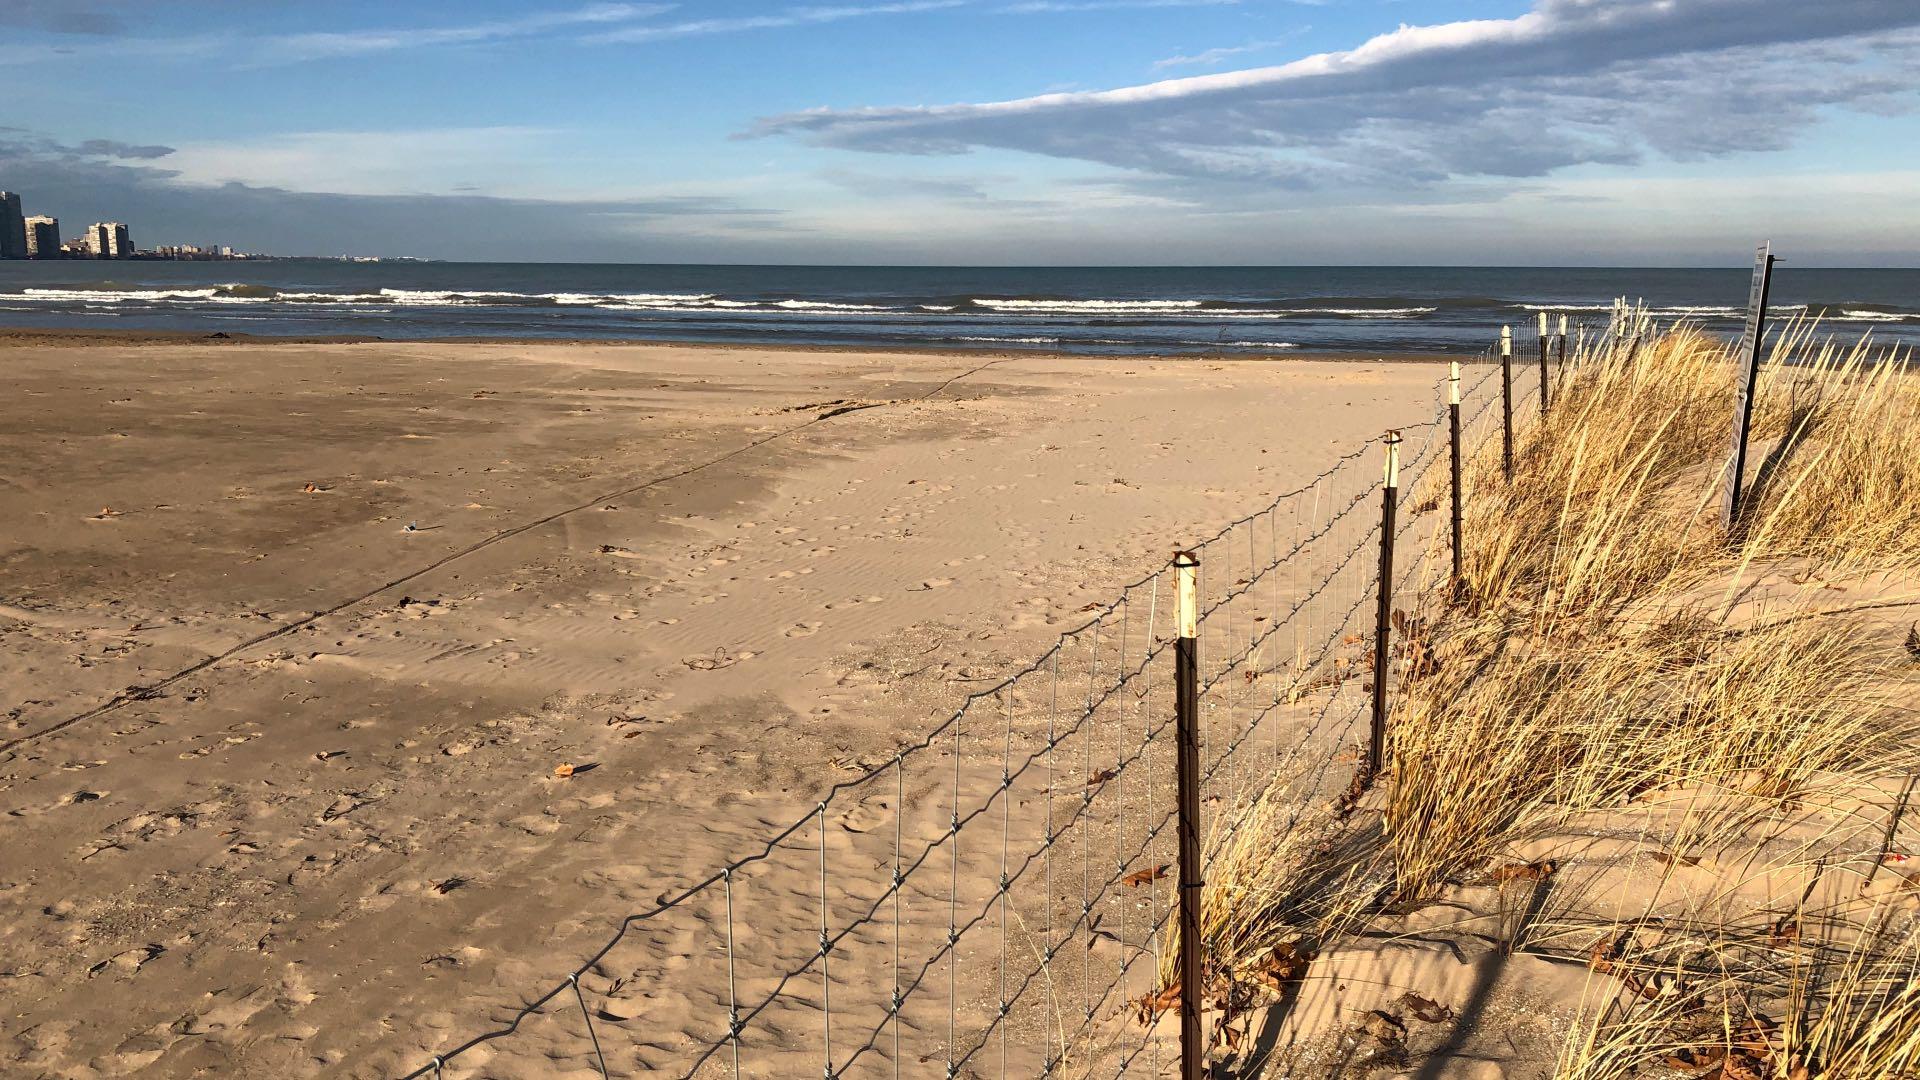 An arbitrary line separates protected habitat from non-protected beach at Montrose. (Patty Wetli / WTTW News)